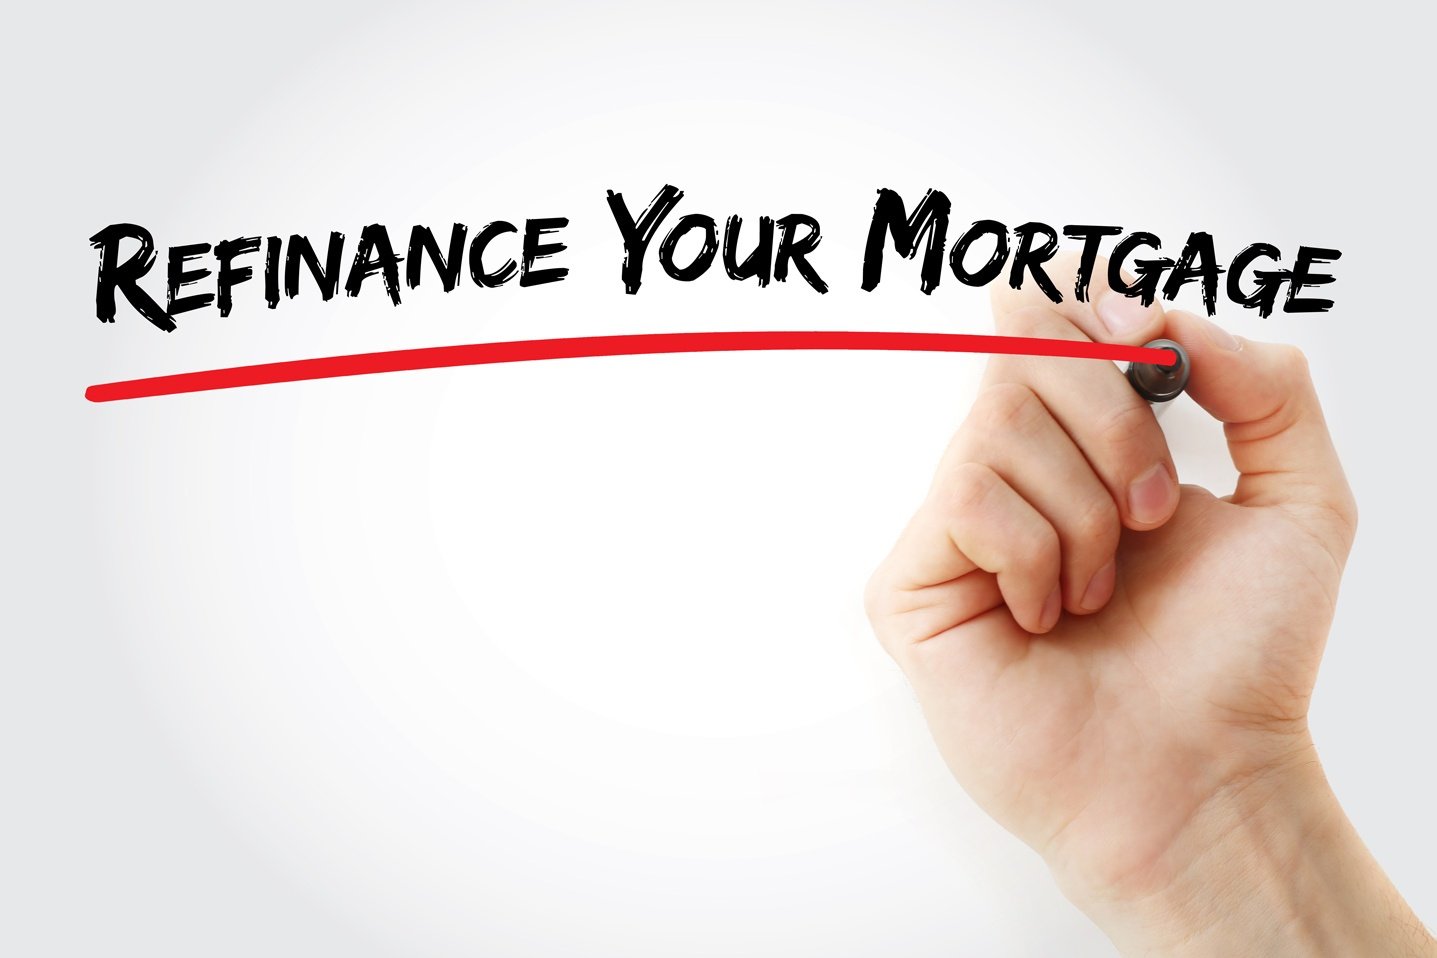 When Should You Refinance your Mortgage